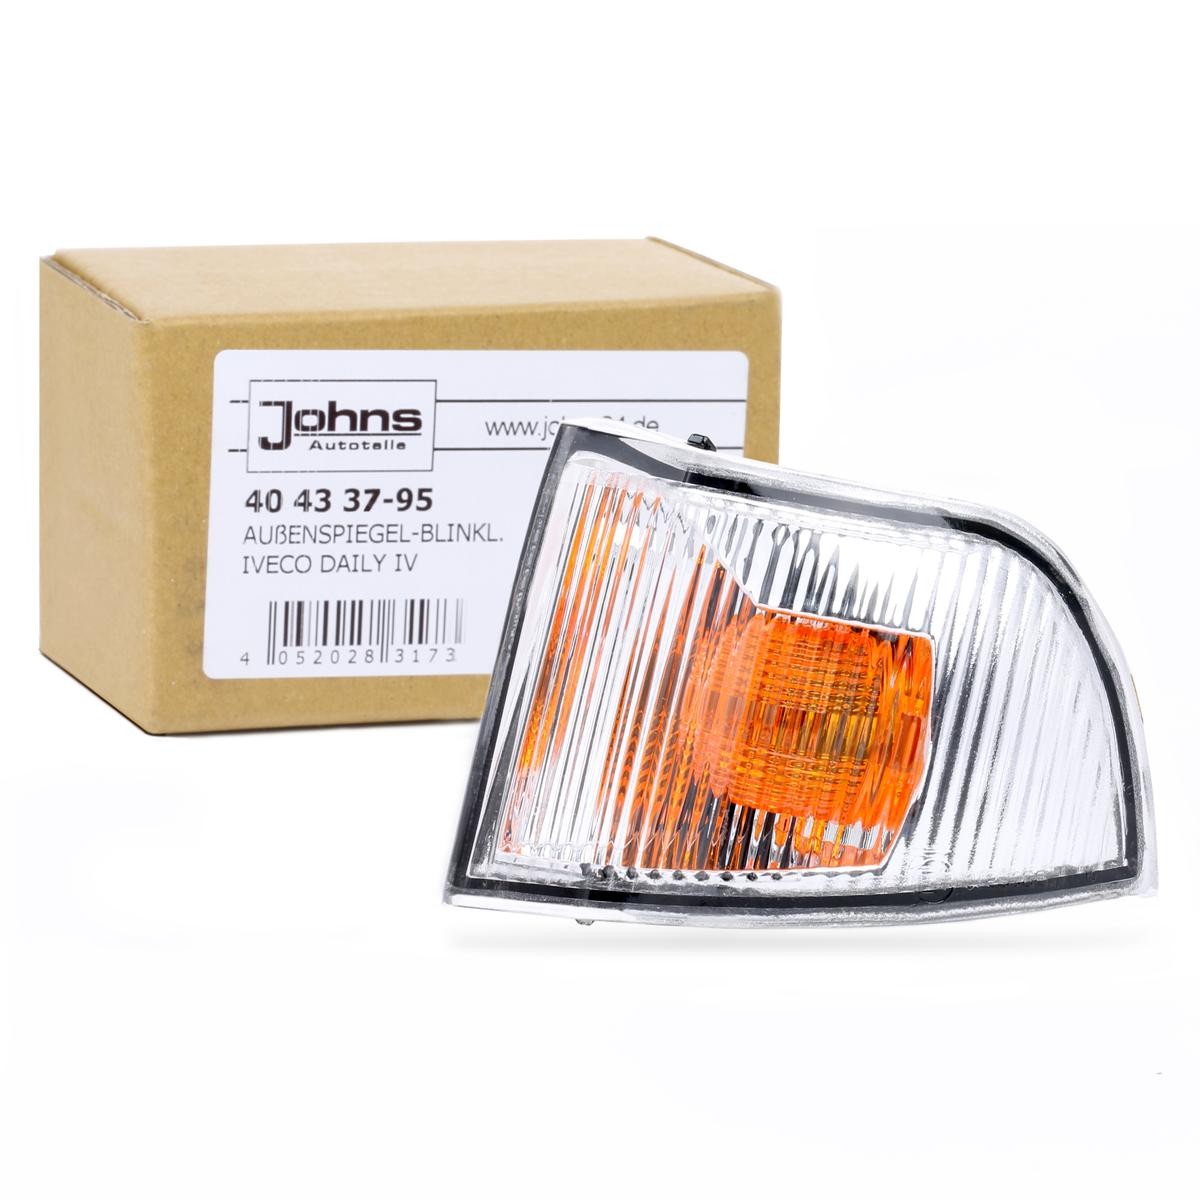 Iveco Side indicator JOHNS 40 43 37-95 at a good price